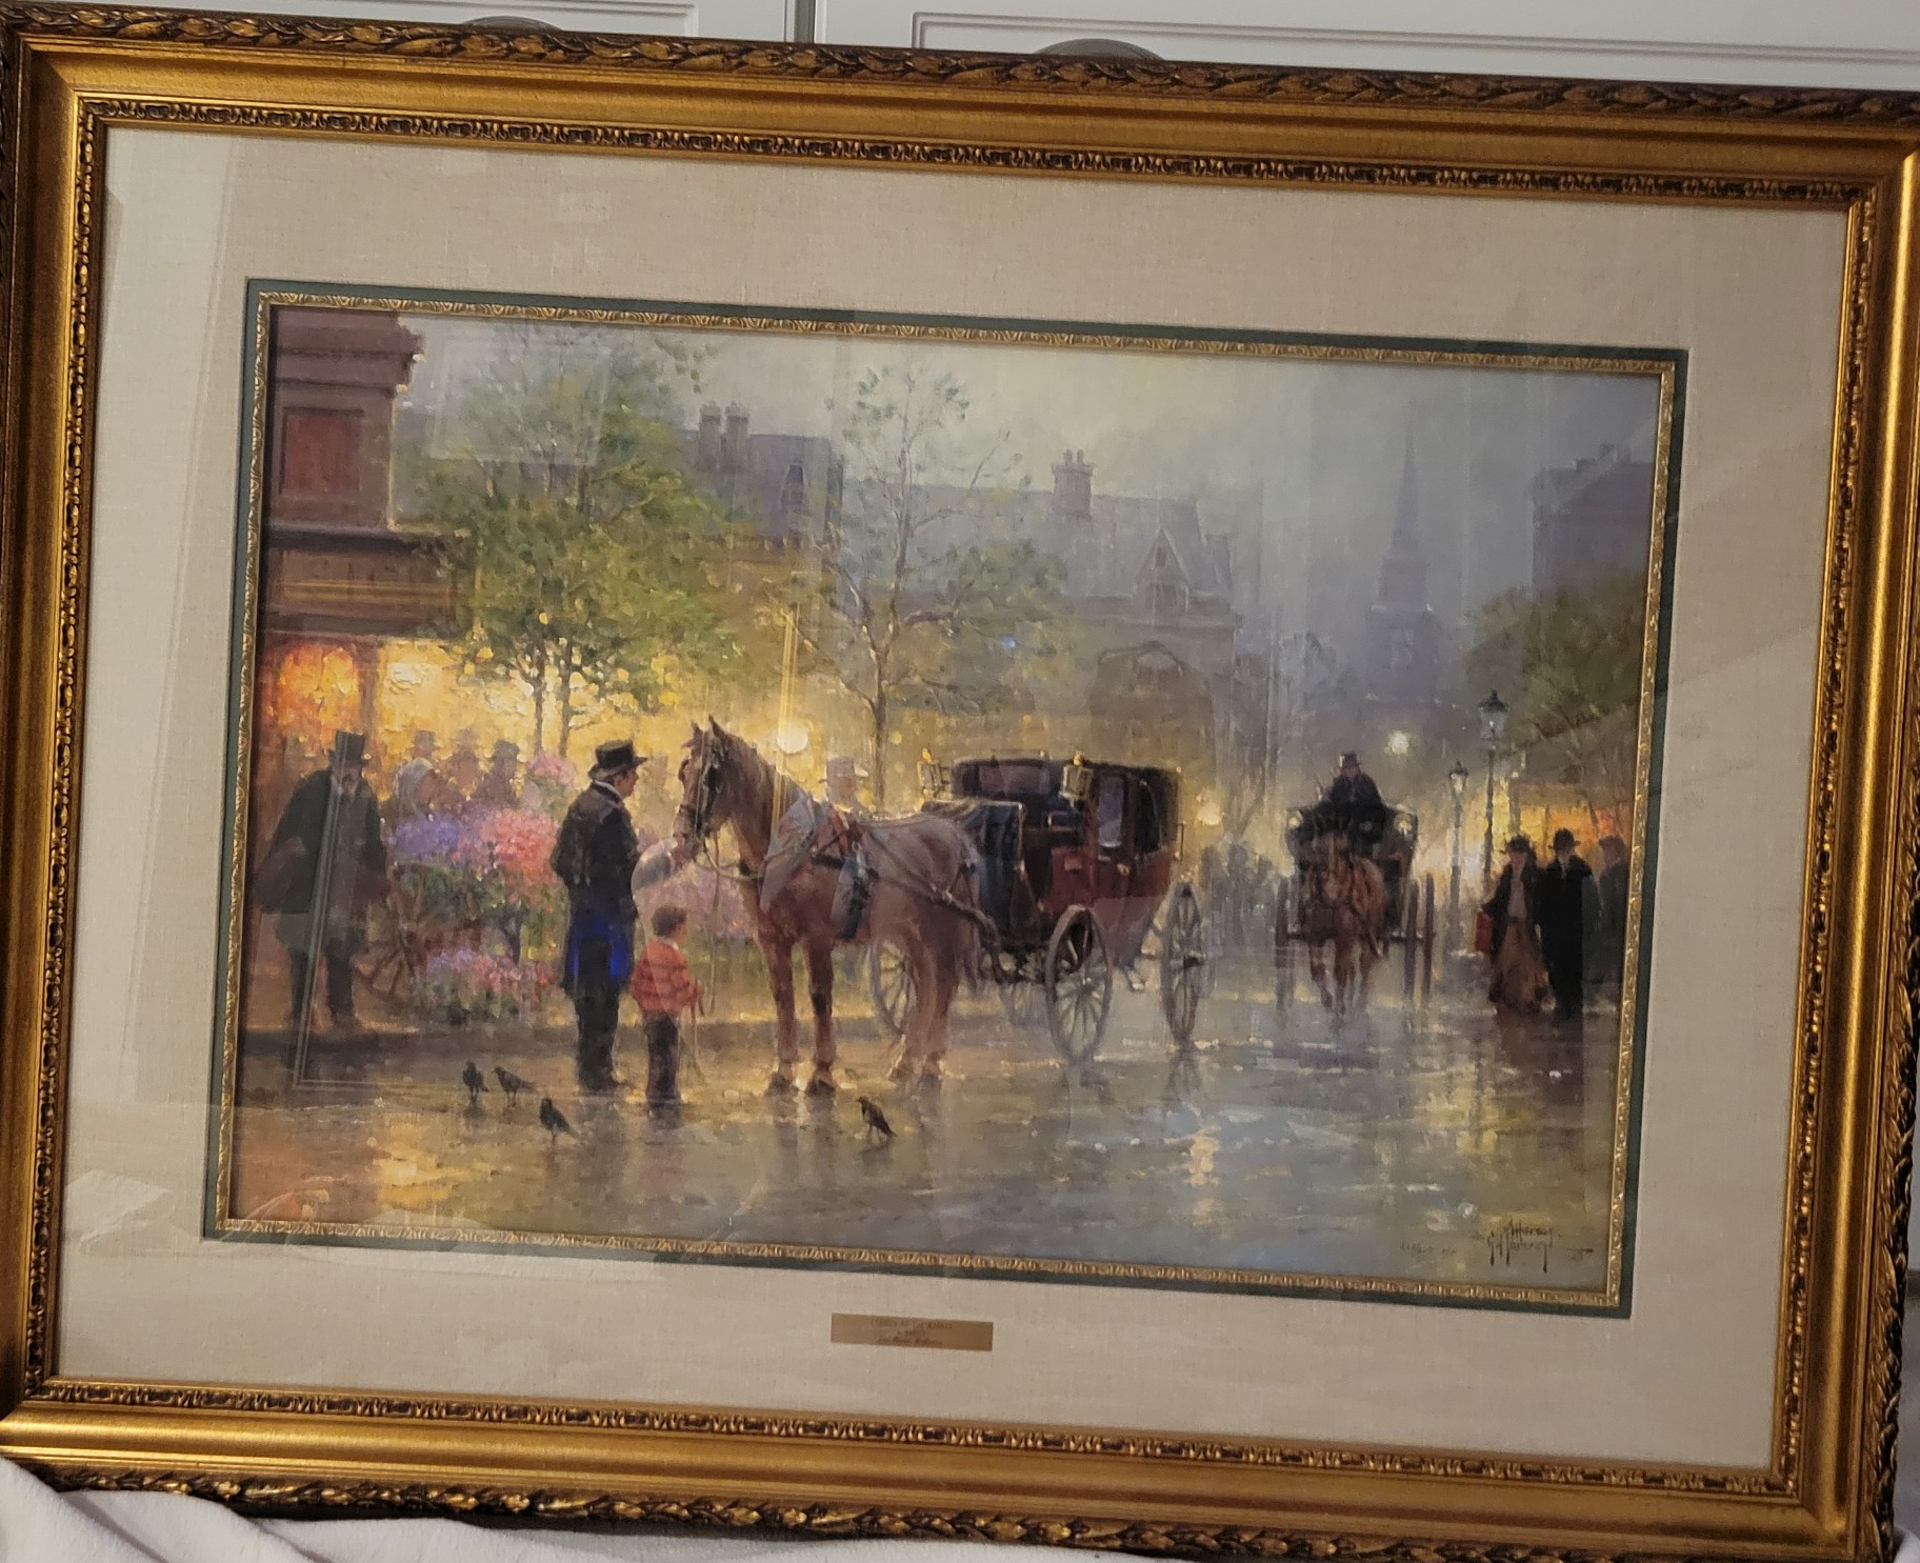 Cabbies at the Market by G. Harvey